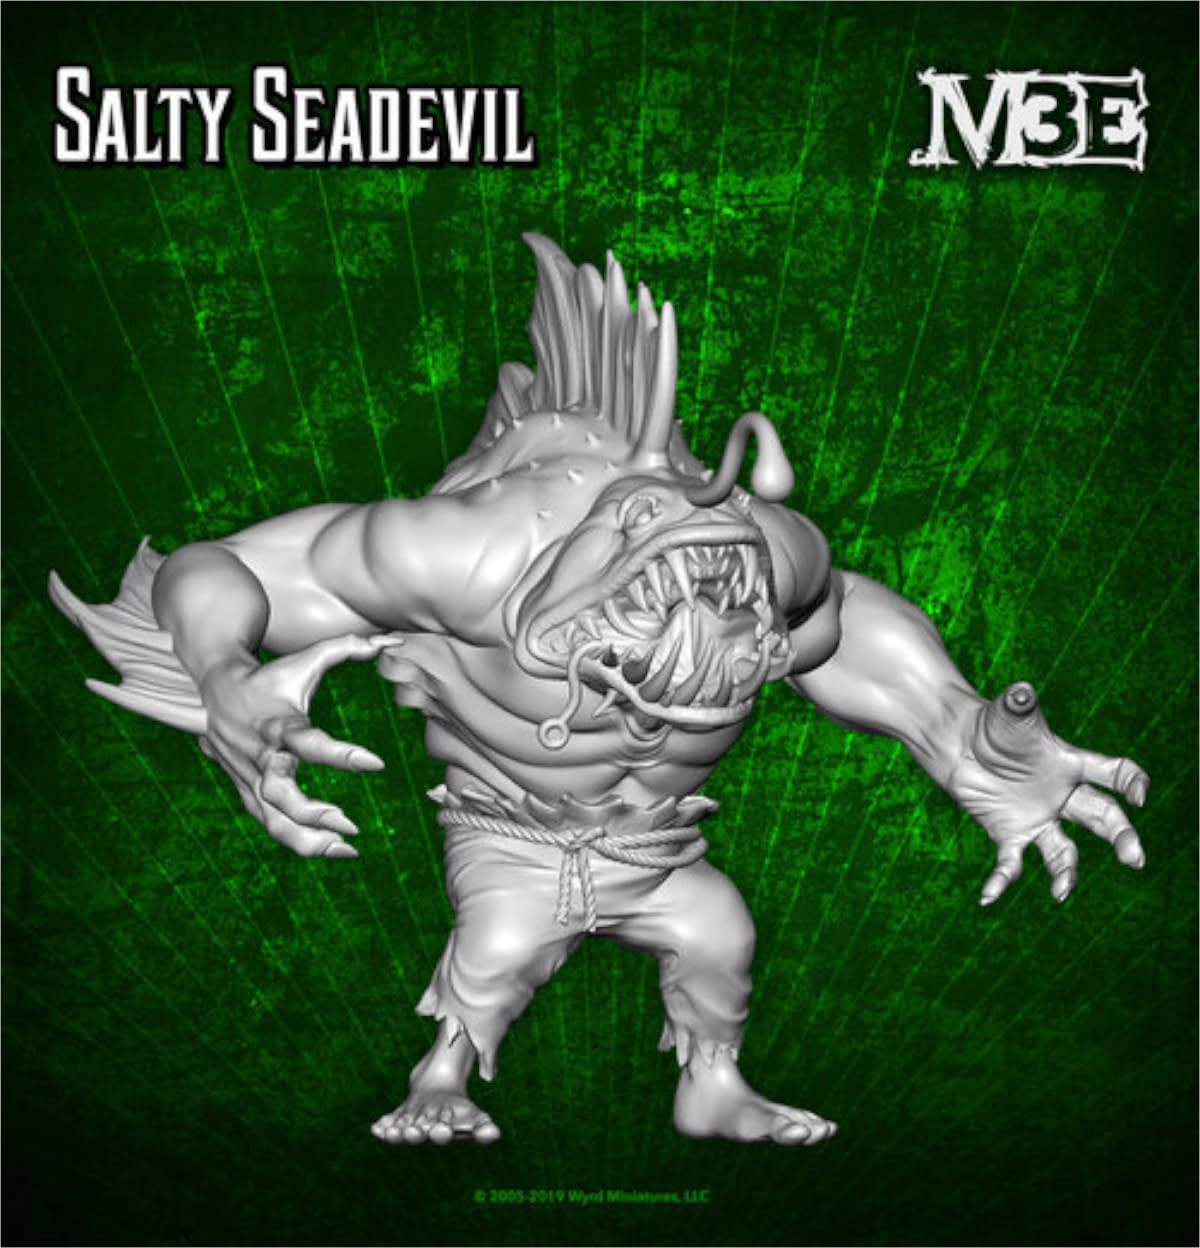 Malifaux gets a new "Salty Seadevil" from Wyrd Games